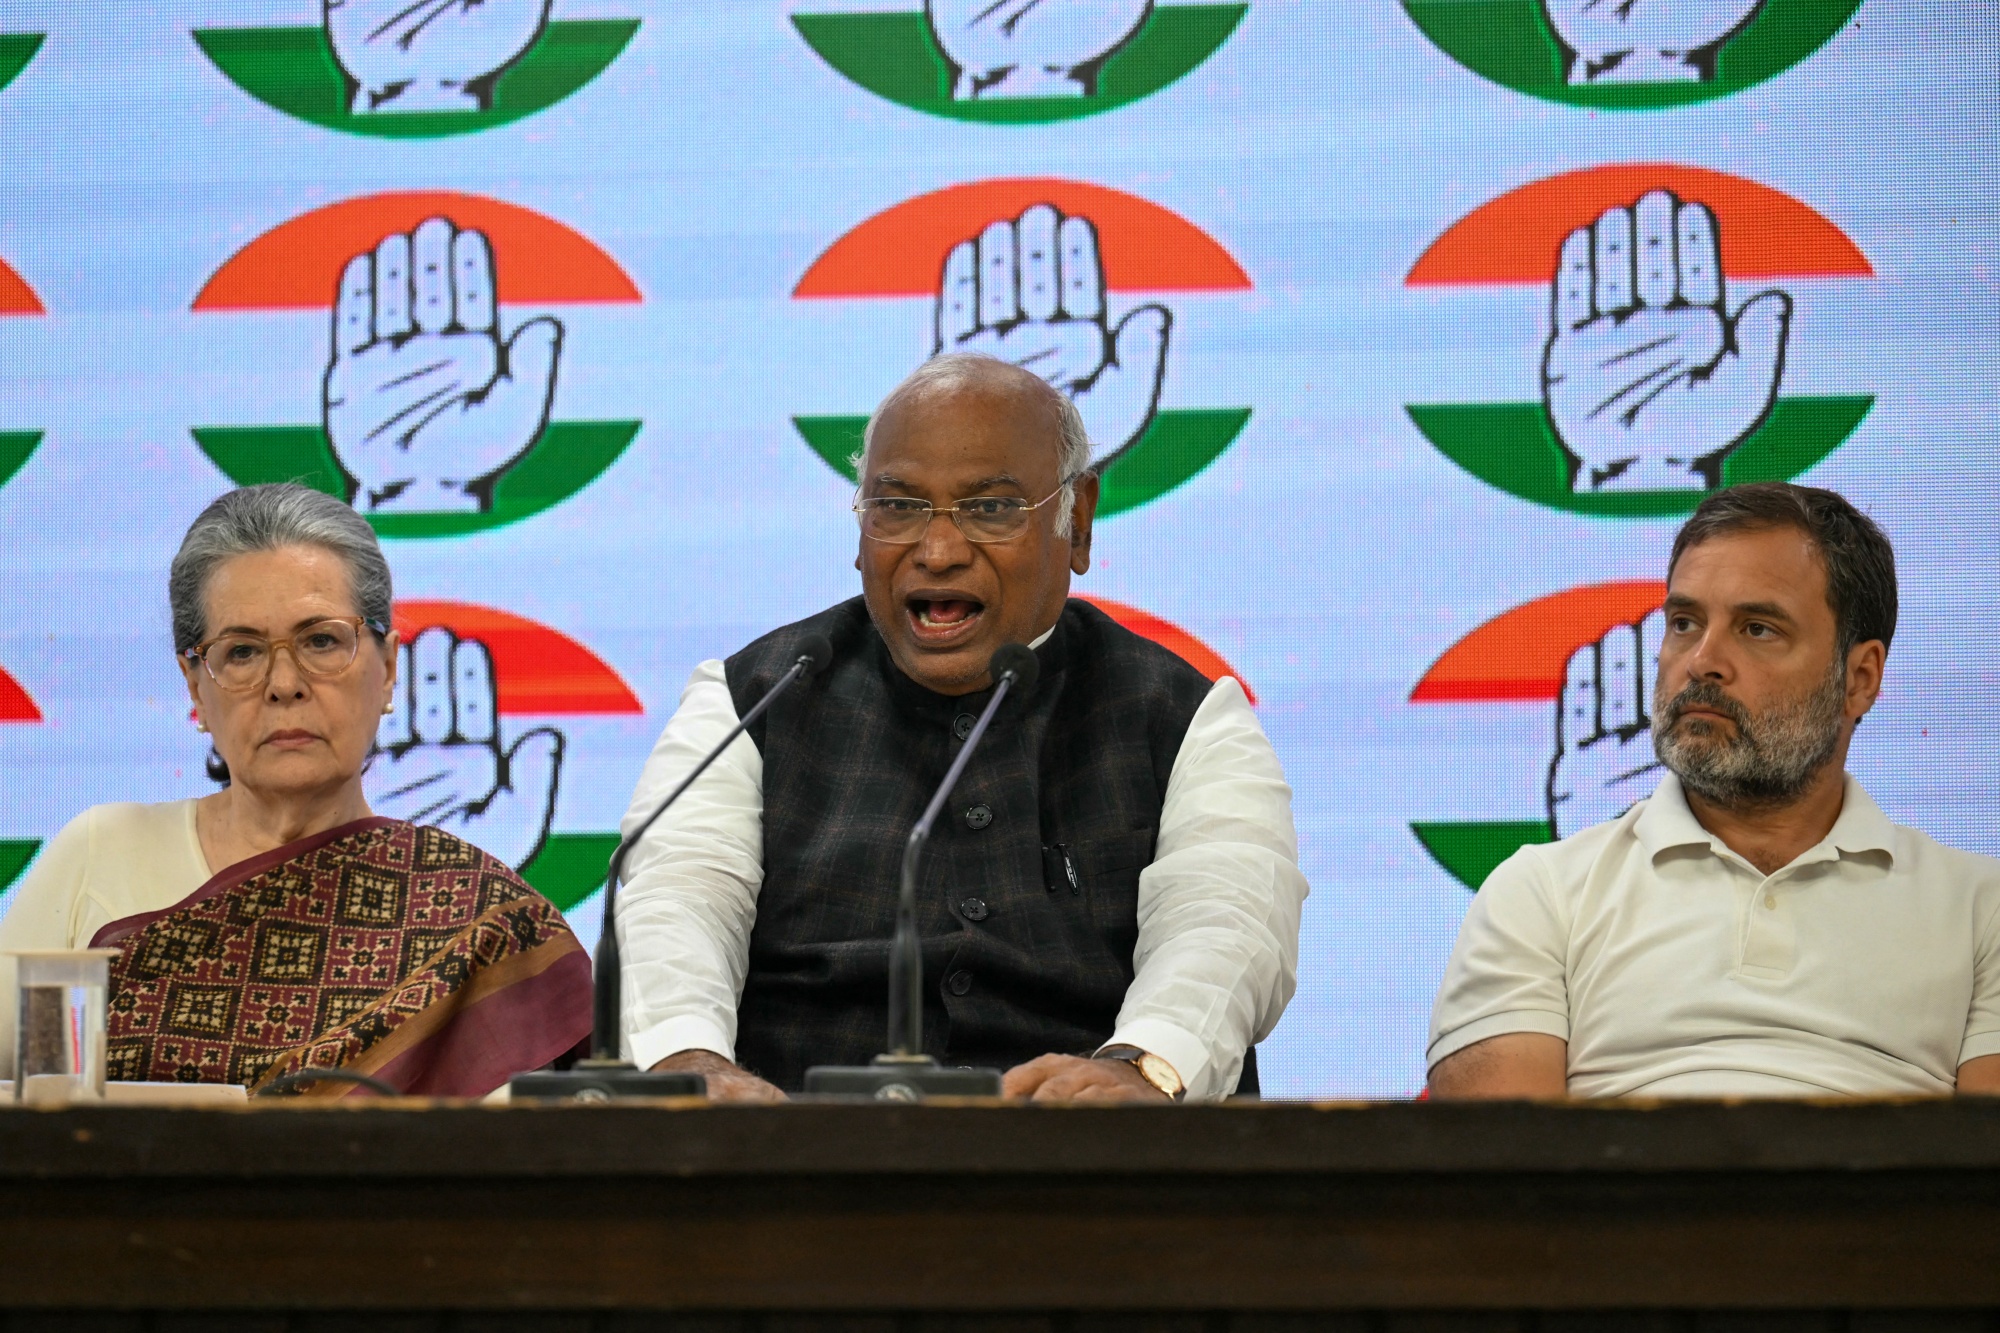 India’s Congress party president Mallikarjun Kharge, center, with Sonia Gandhi, left, and Rahul Gandhi at the Congress party headquarters in New Delhi on March 21.